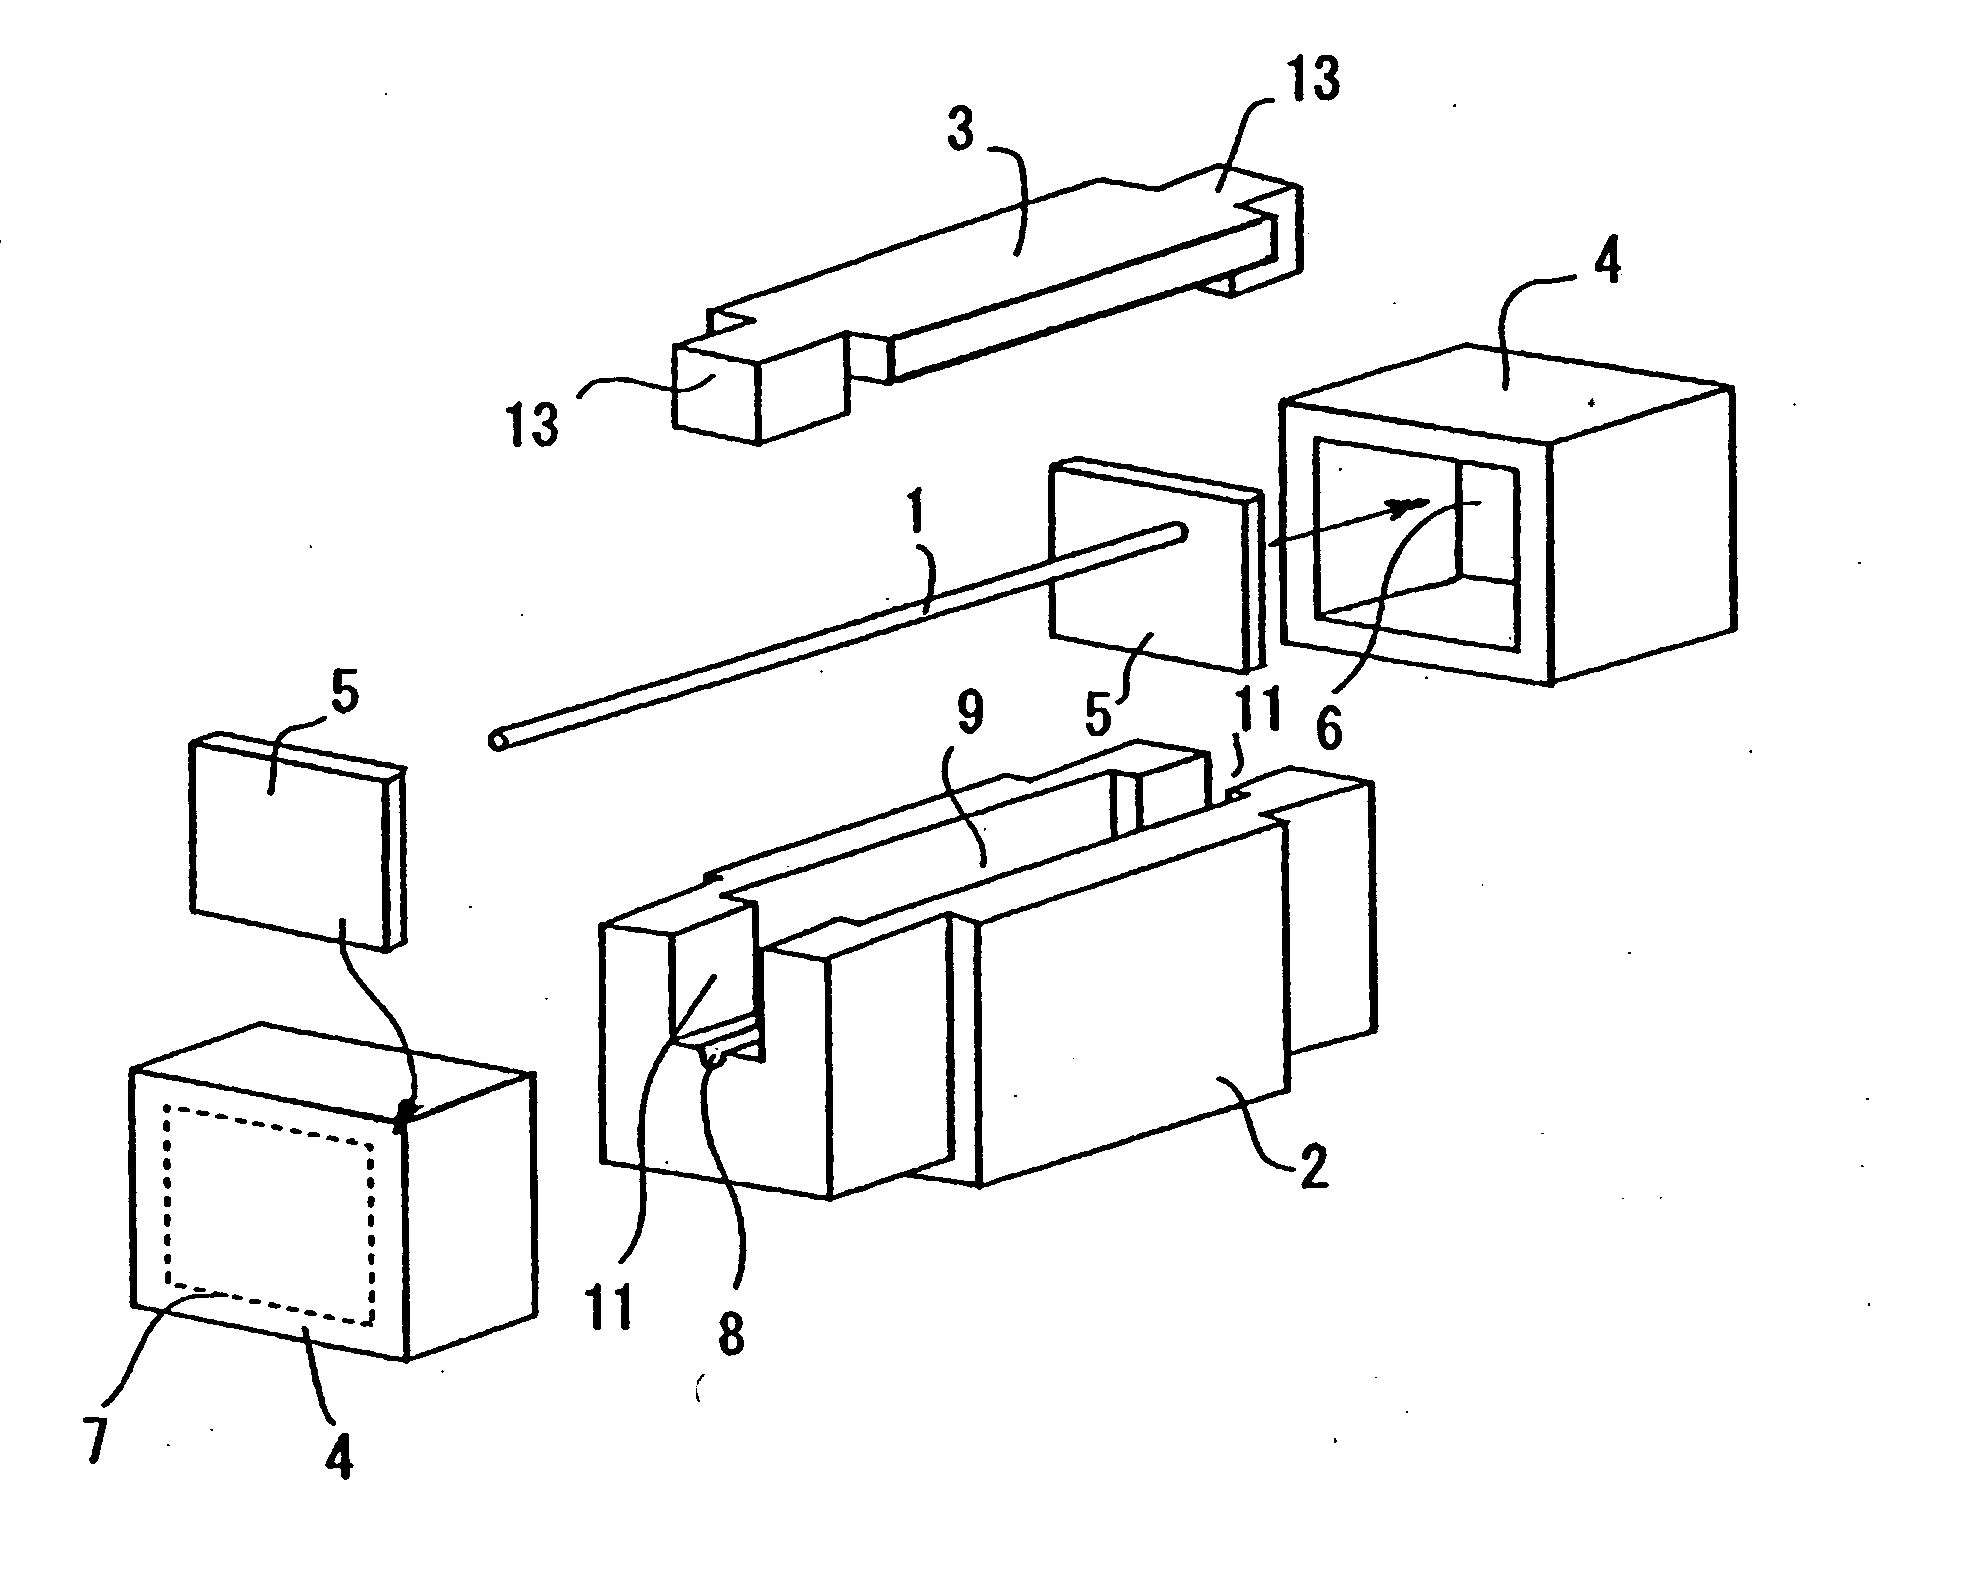 Current fuse and method of making the current fuse